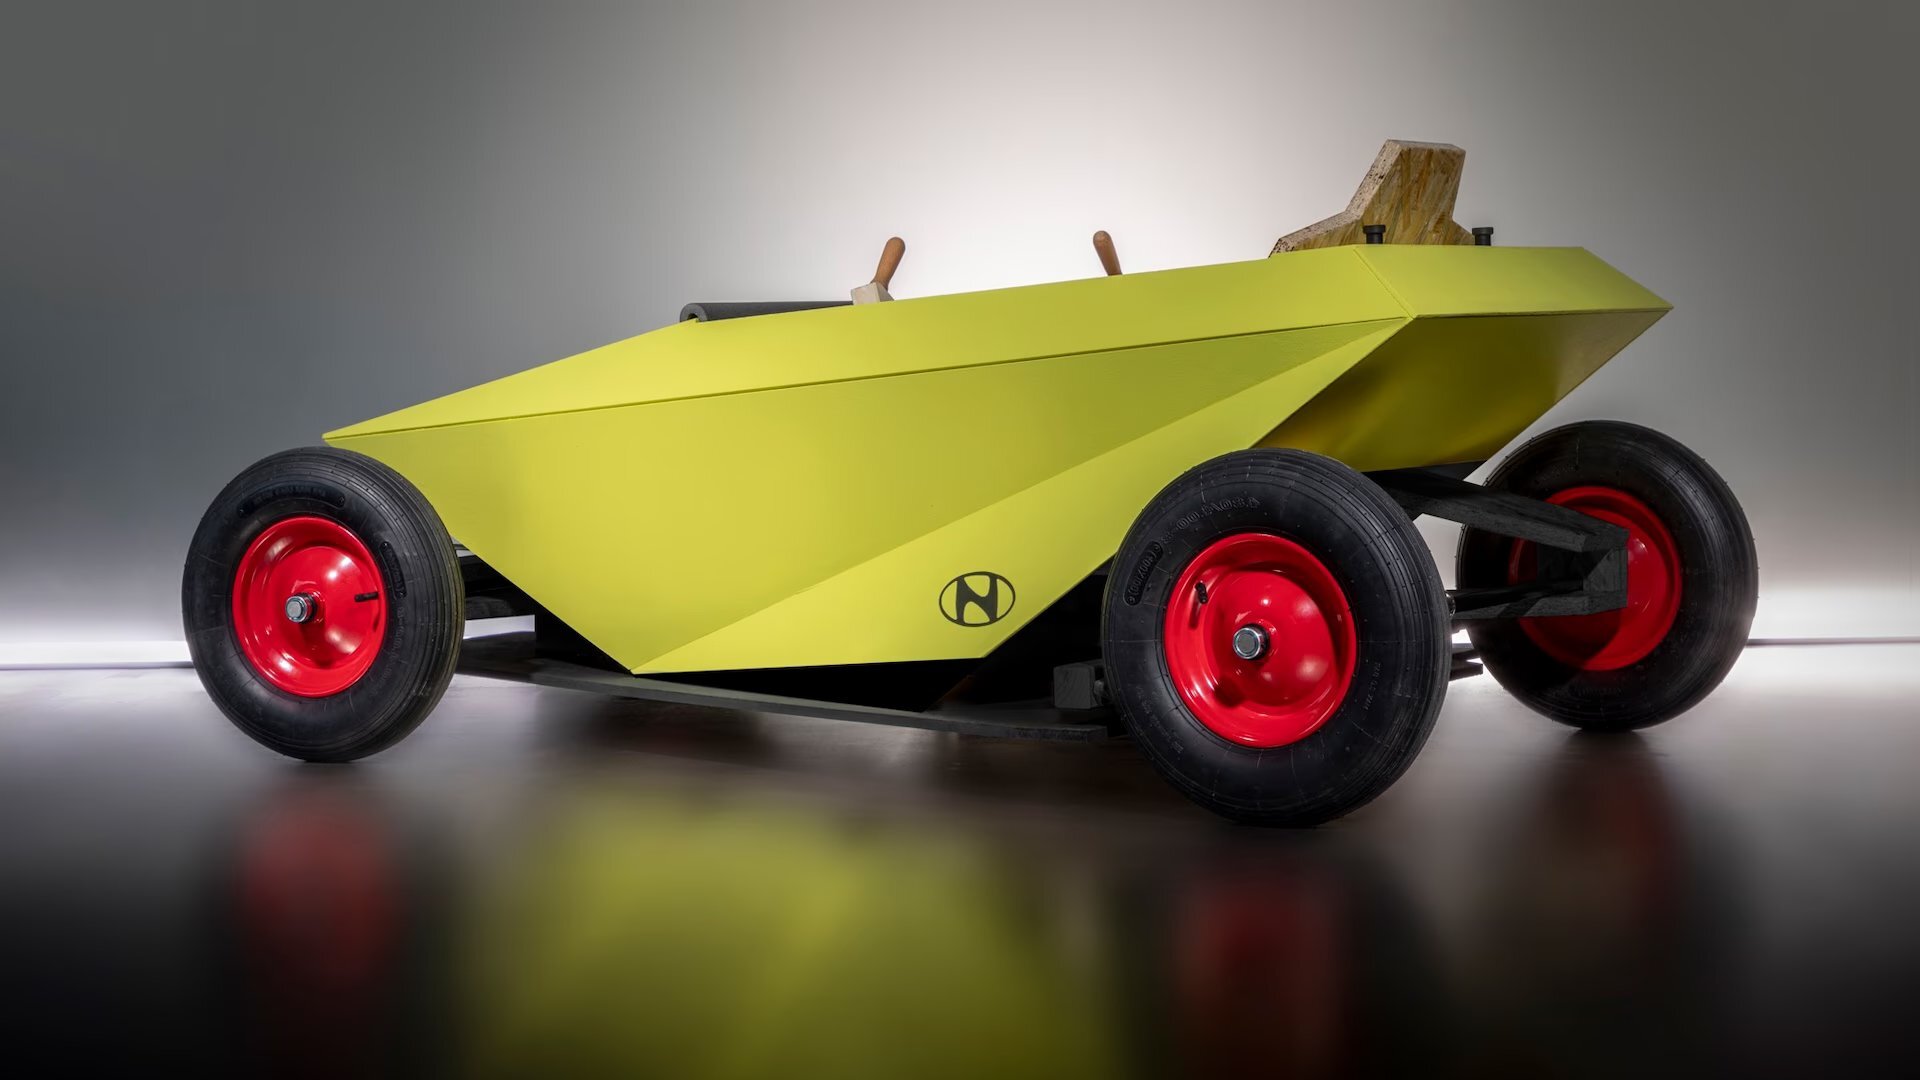 DIY Soapbox Car: How To Build Your Own Racing Machine